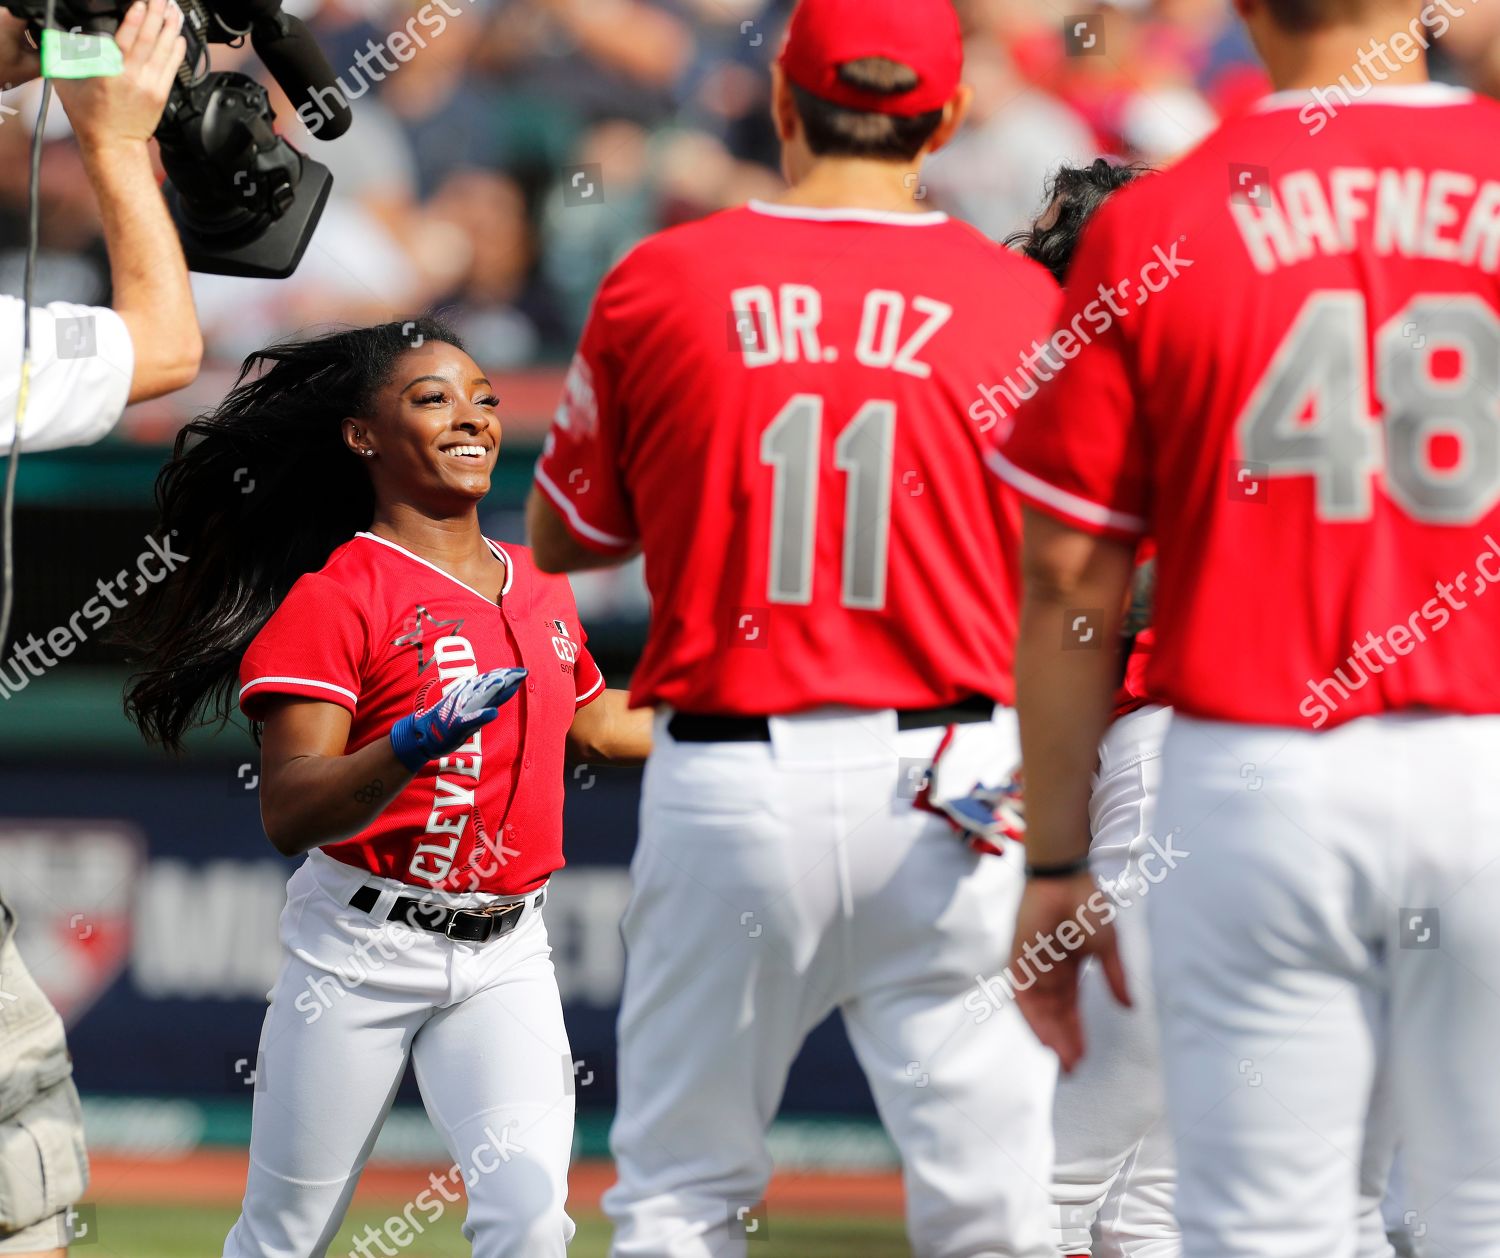 Photos: 2019 MLB All-Star Celebrity Softball Game in Cleveland